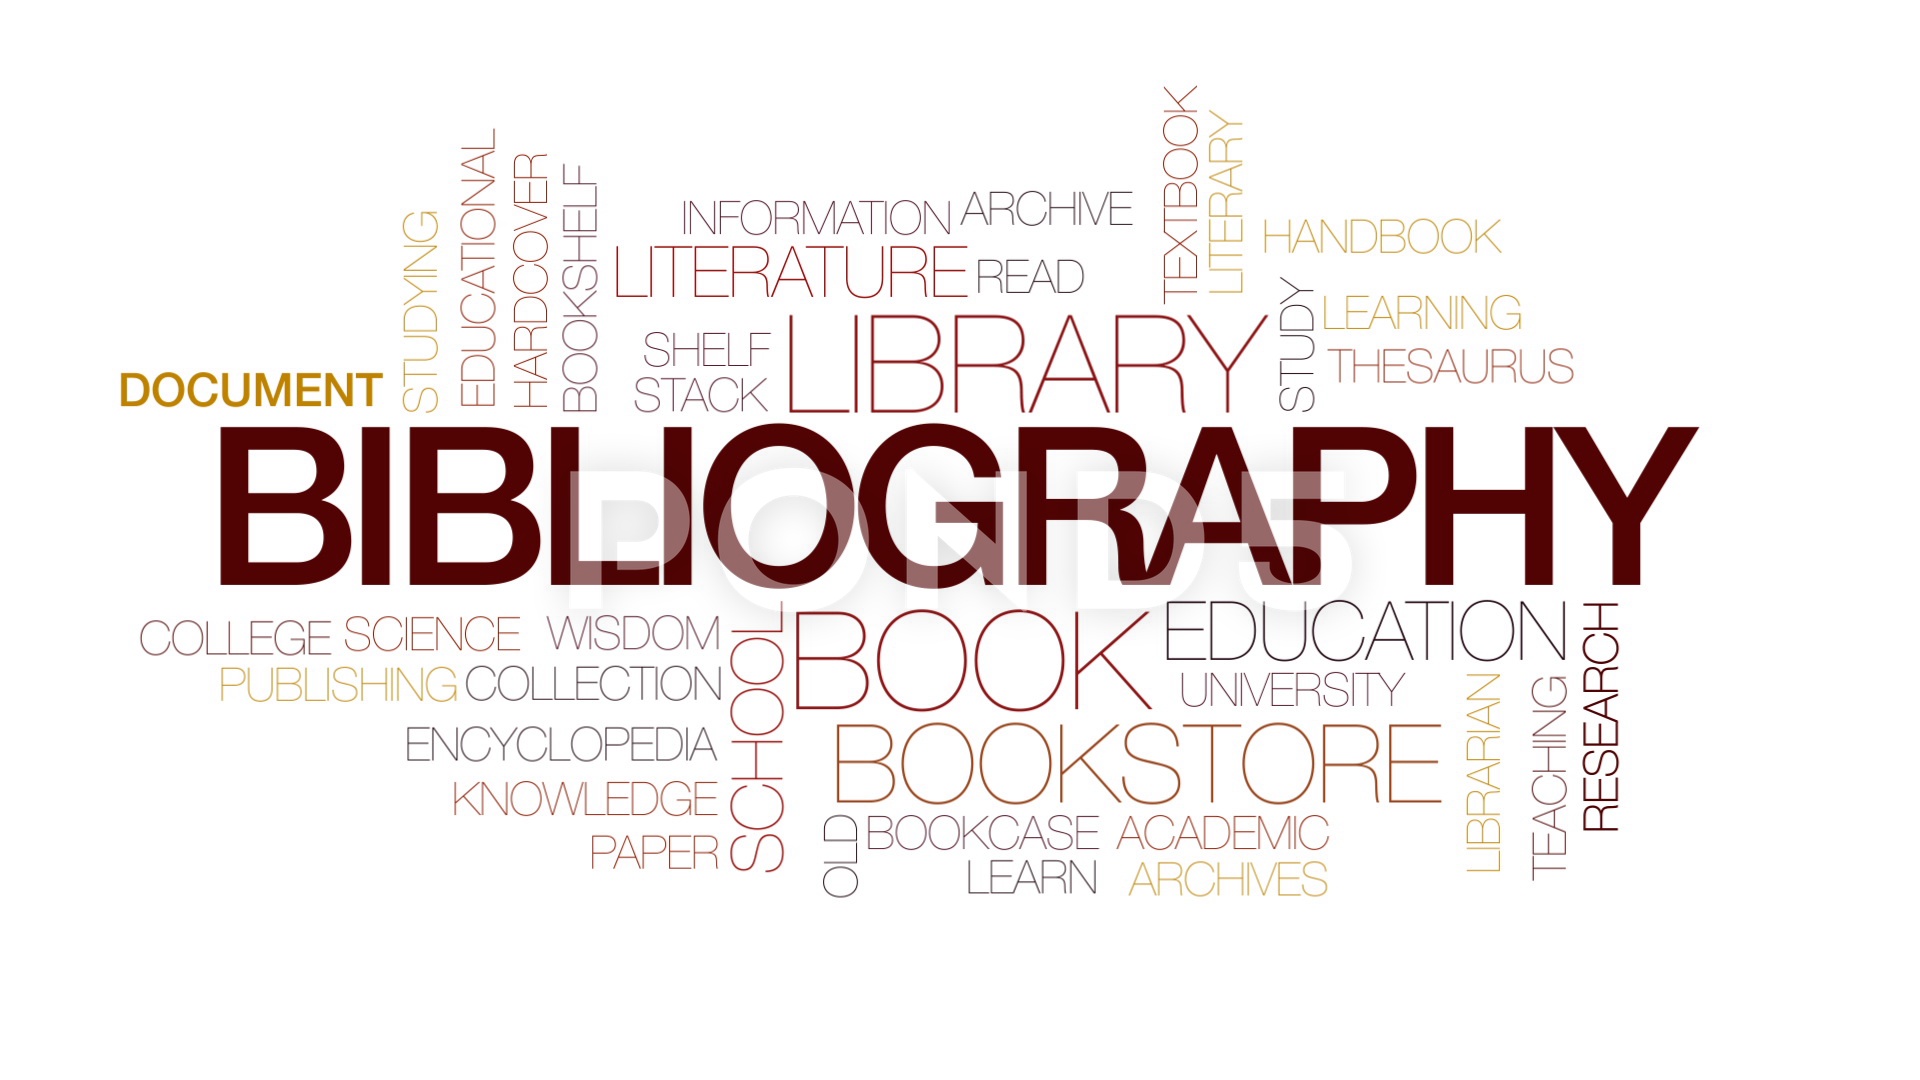 bibliography or bibliography